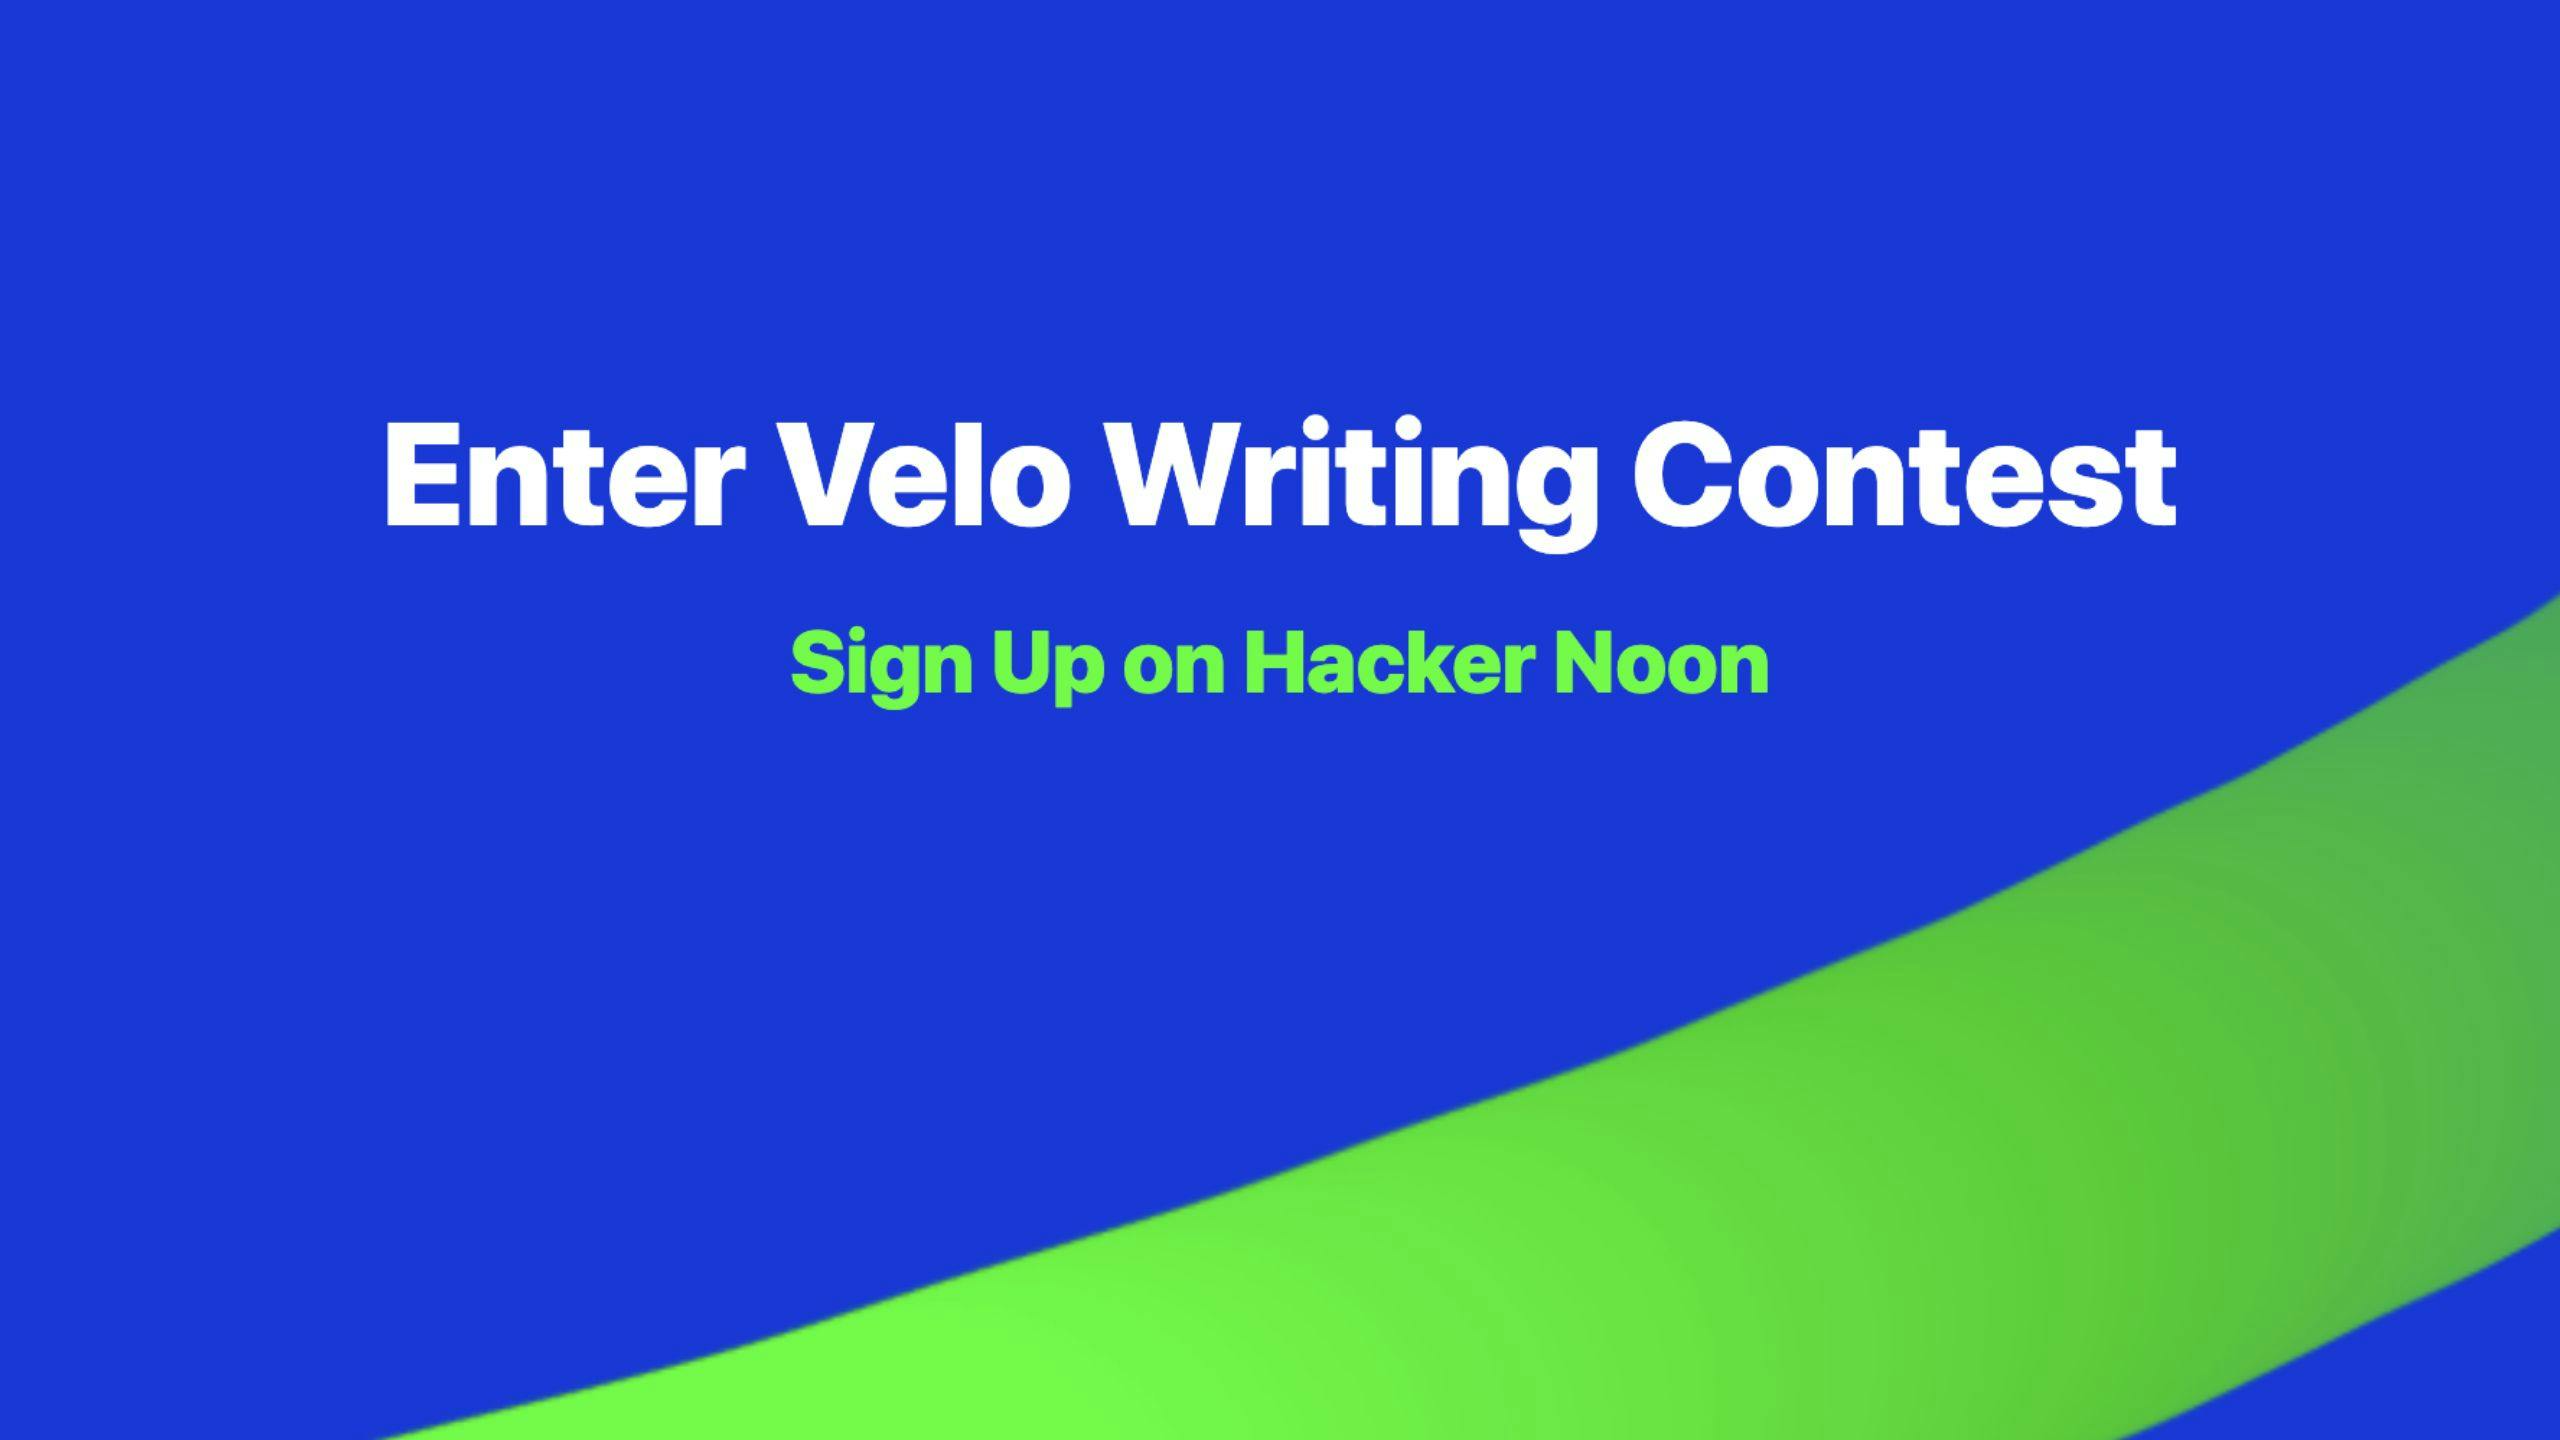 /introducing-the-velo-writing-contest-by-wix-and-hacker-noon-ta3433v0 feature image